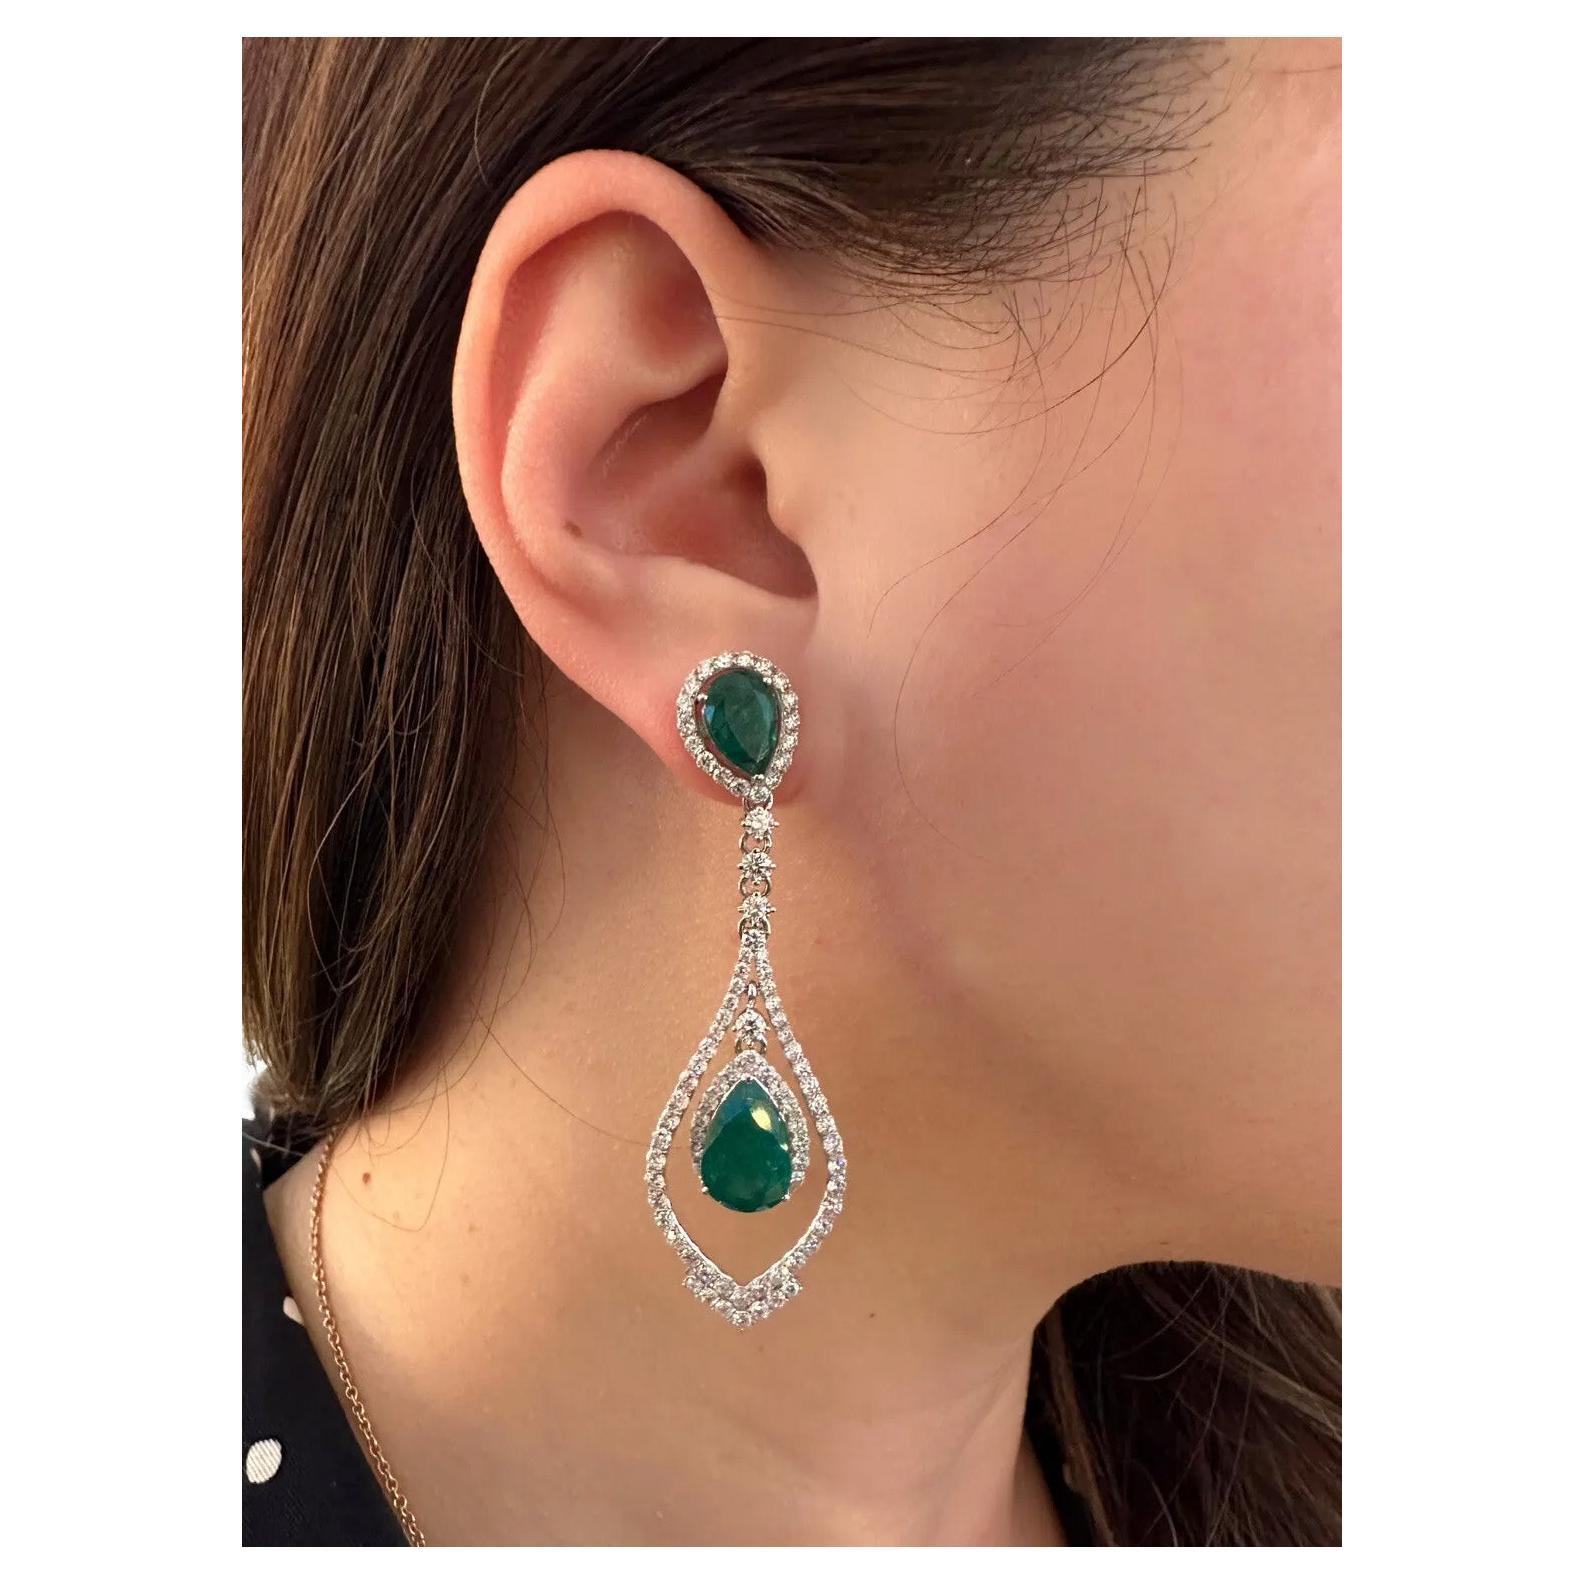 Pear Emerald and Diamond Drop Earrings in 18k White Gold

Long Diamond and Emerald Drop Earrings features 4 Pear shaped Natural Green Emeralds set with Round Brilliant Diamonds in 18k White Gold.

Total emerald weight is 8.60 carats.
Total diamond